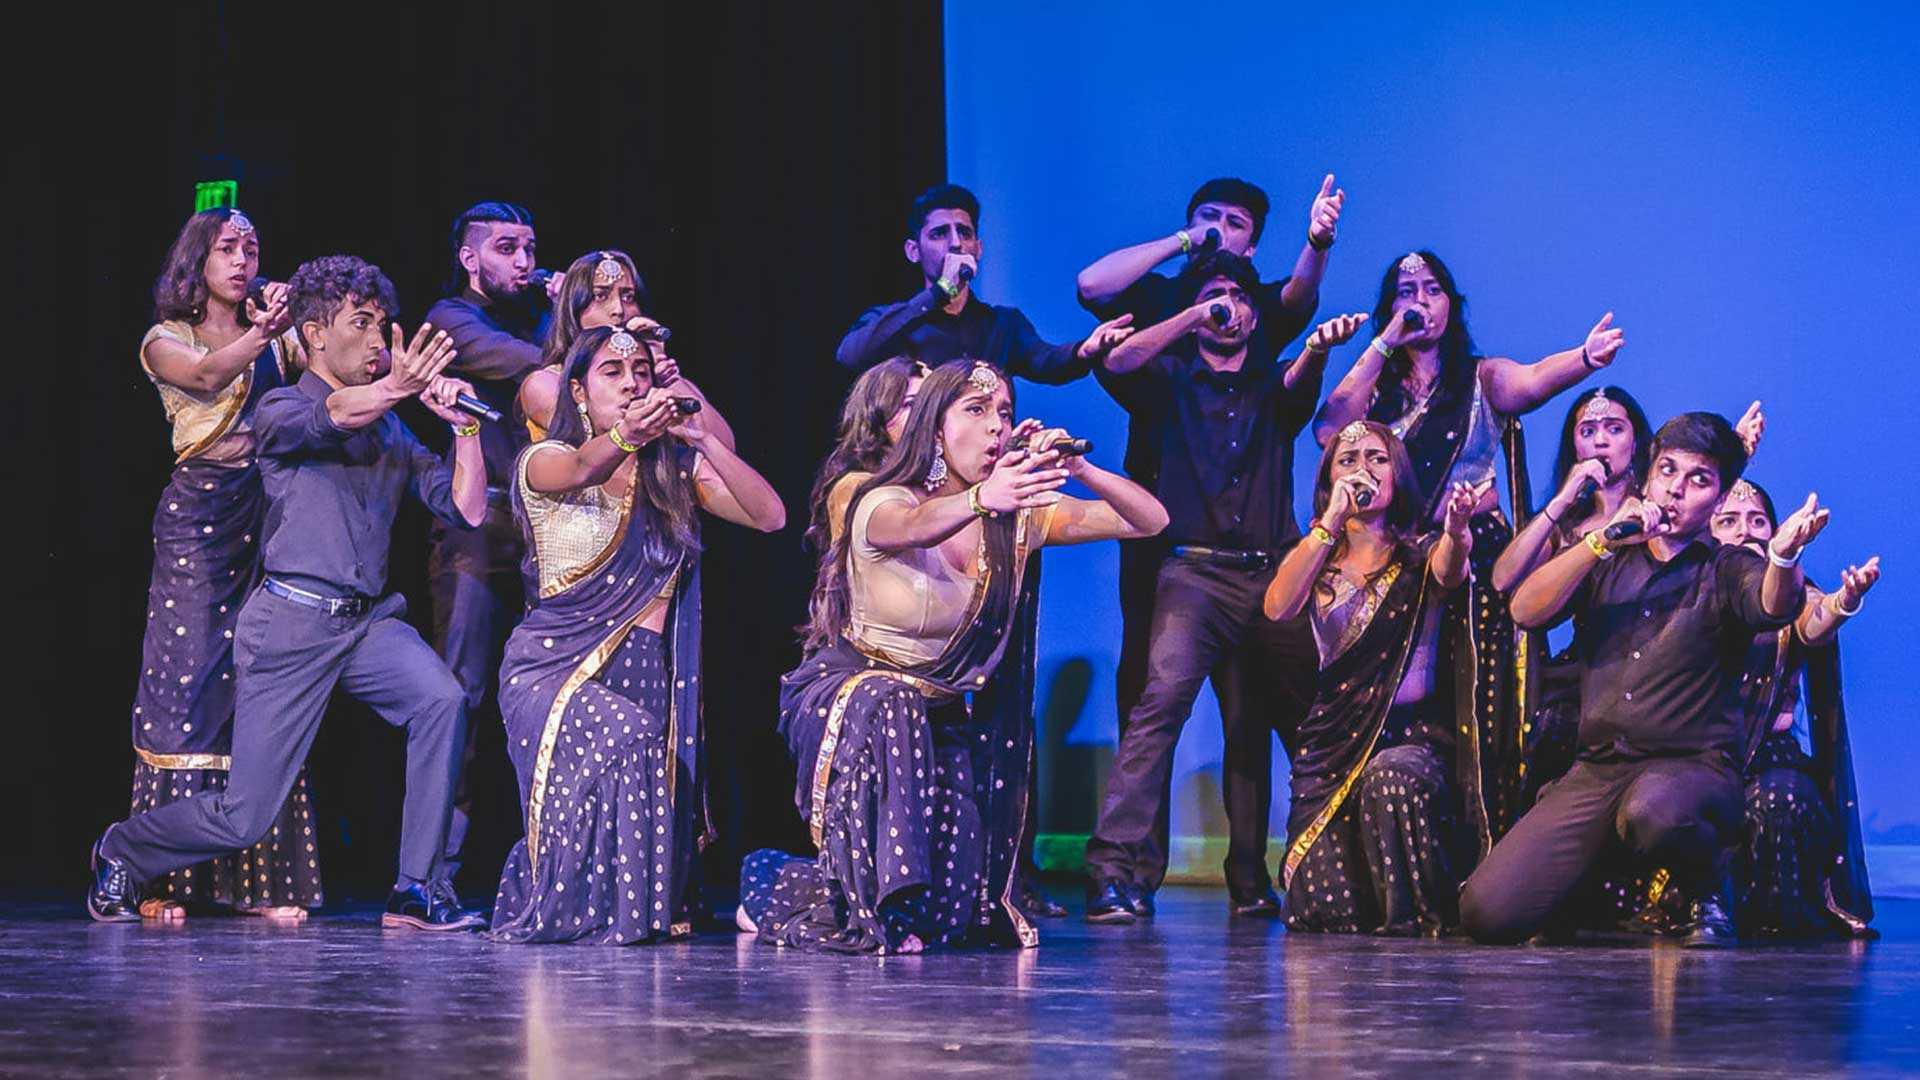 Anokha, founded in 2001, belts out its South Asian fusion music sans instrumental backing.